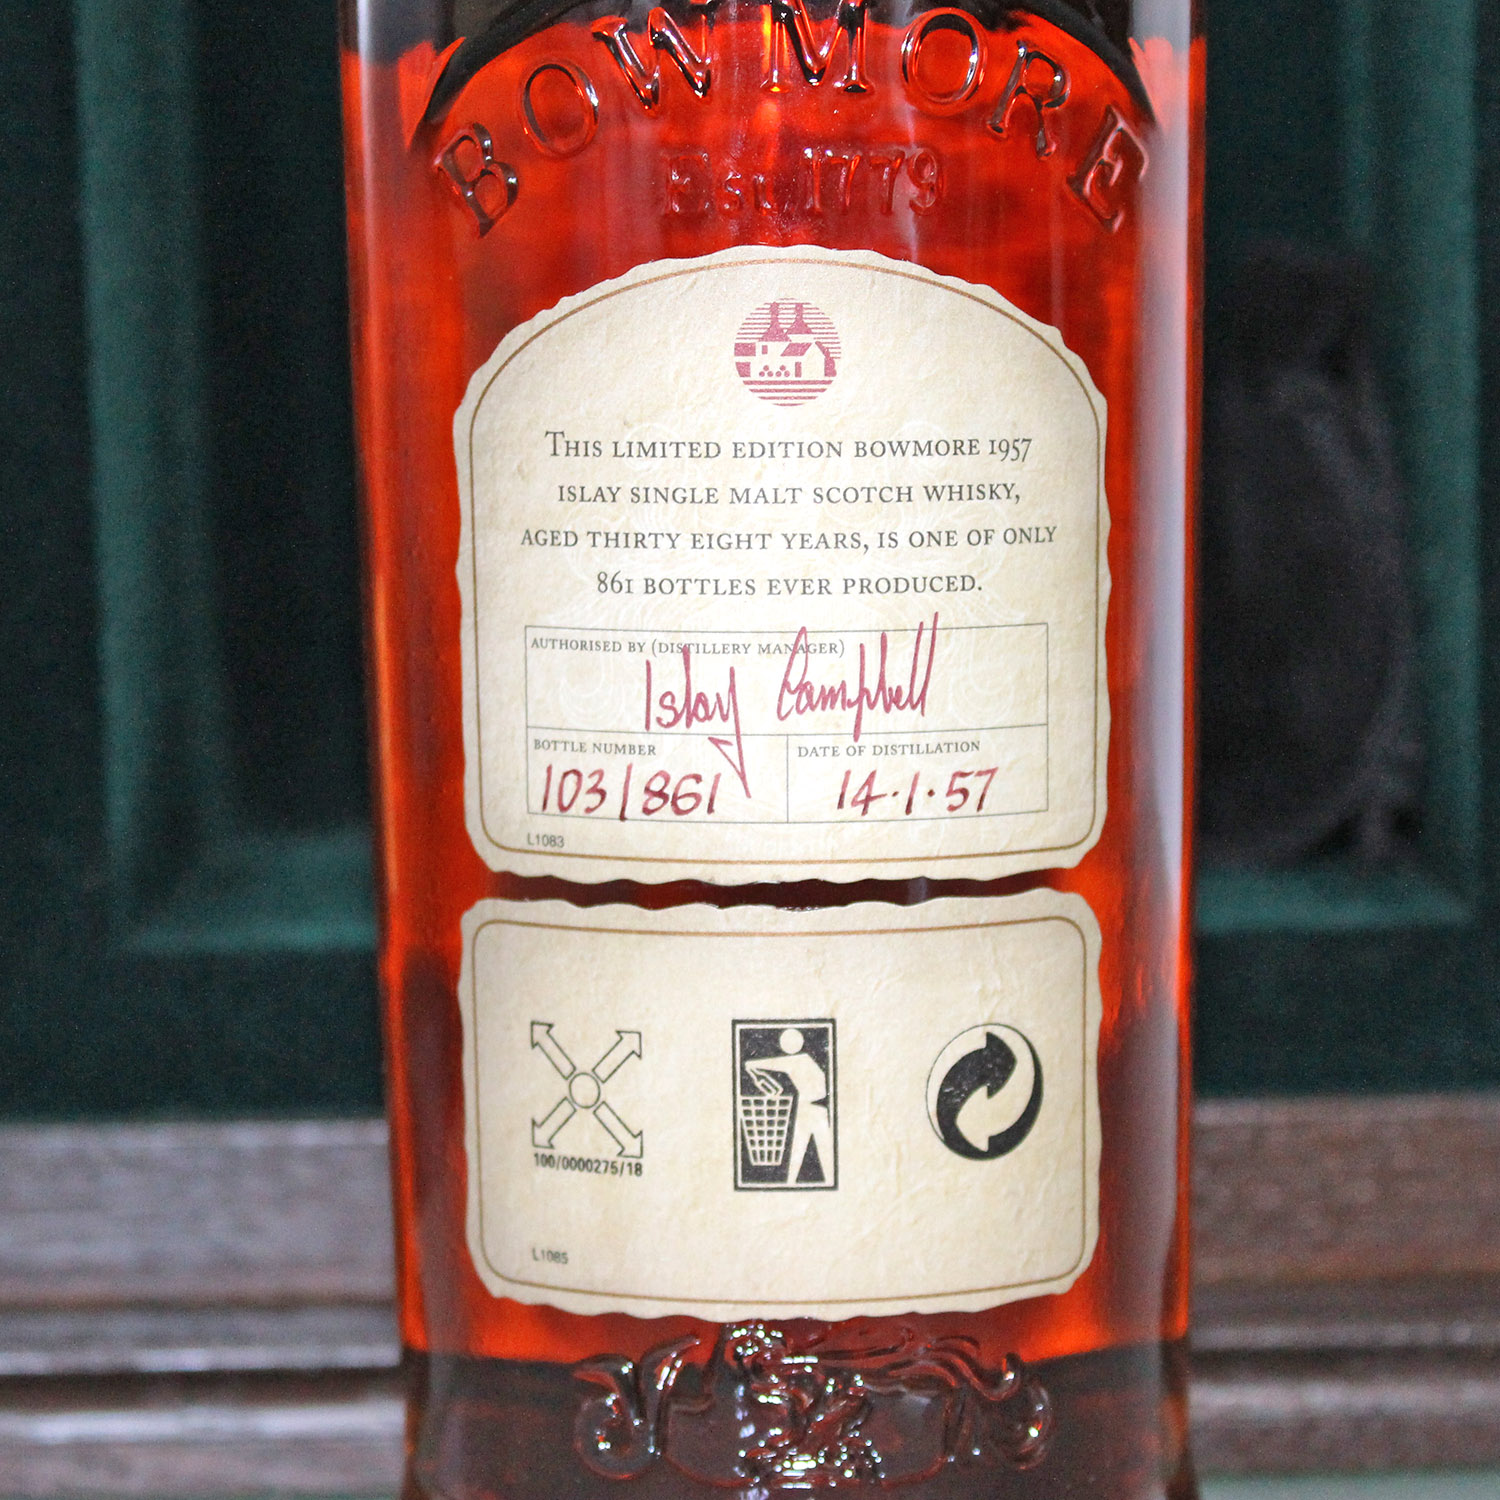 Bowmore 1957 38 Years Old back label